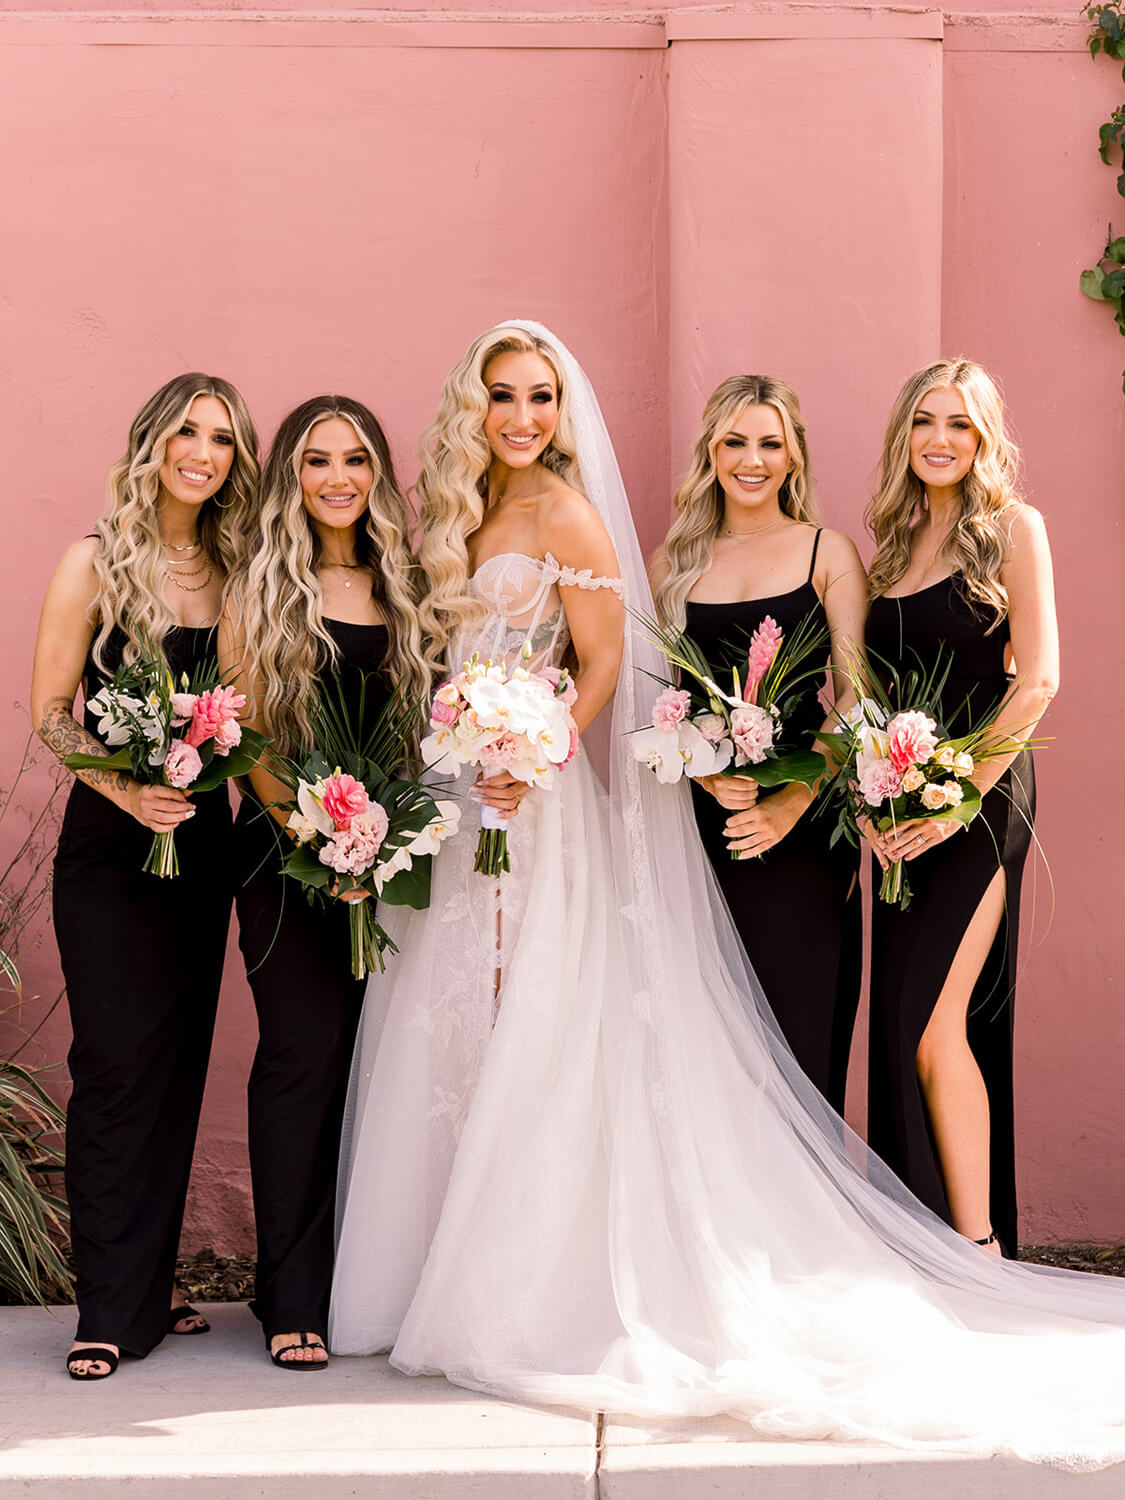 Bride and bridesmaids portraits at The Sands